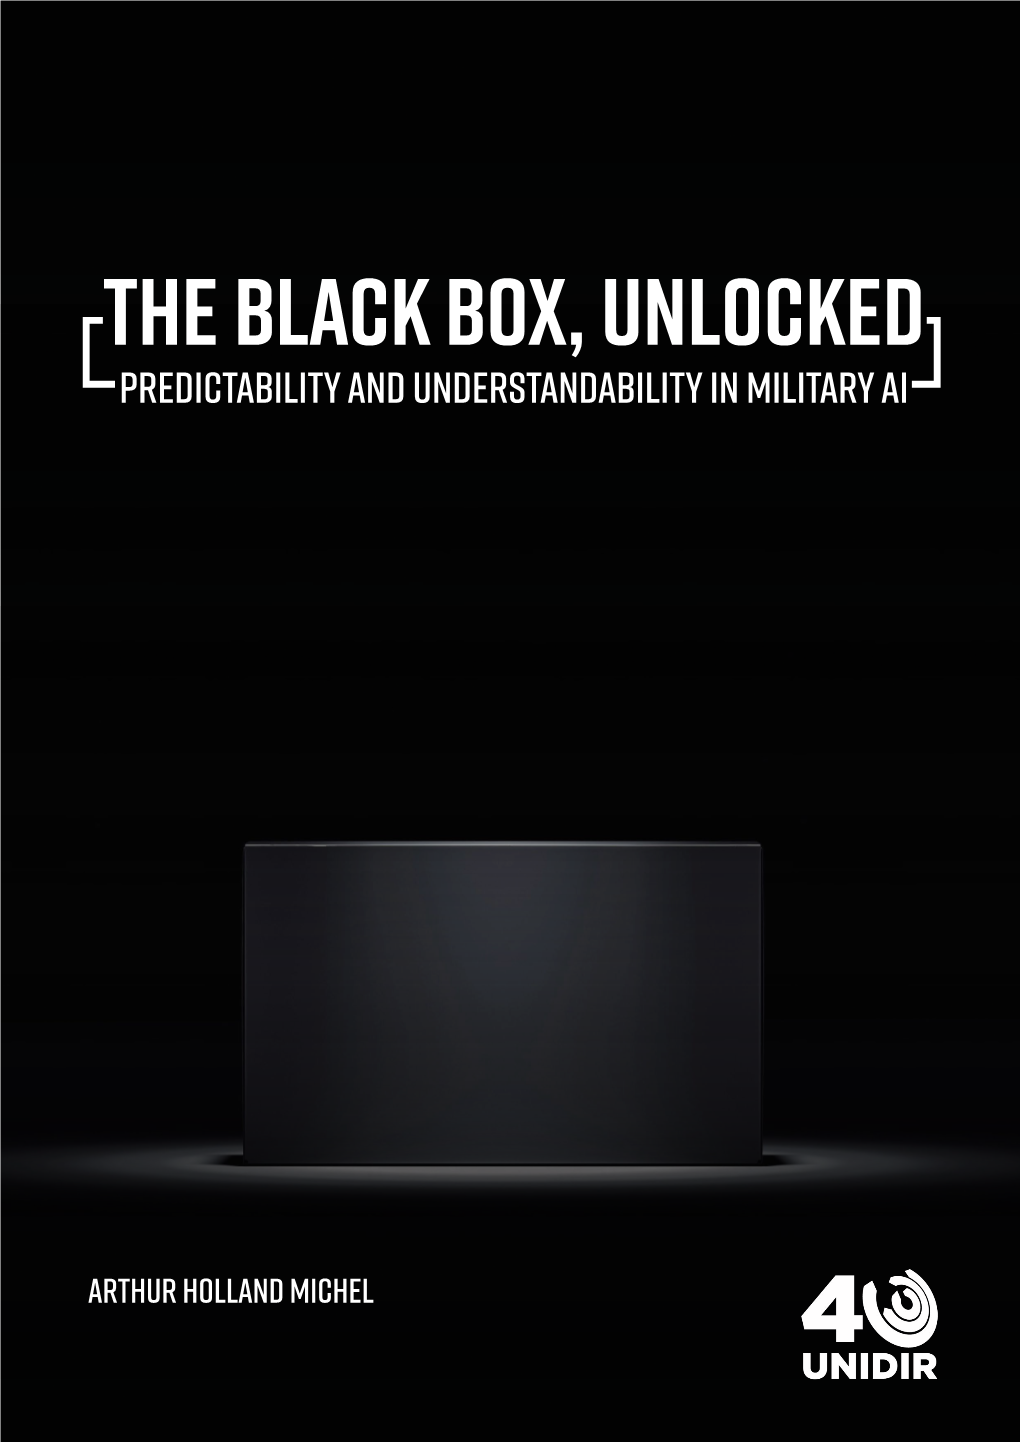 The Black Box, Unlocked PREDICTABILITY and UNDERSTANDABILITY in MILITARY AI